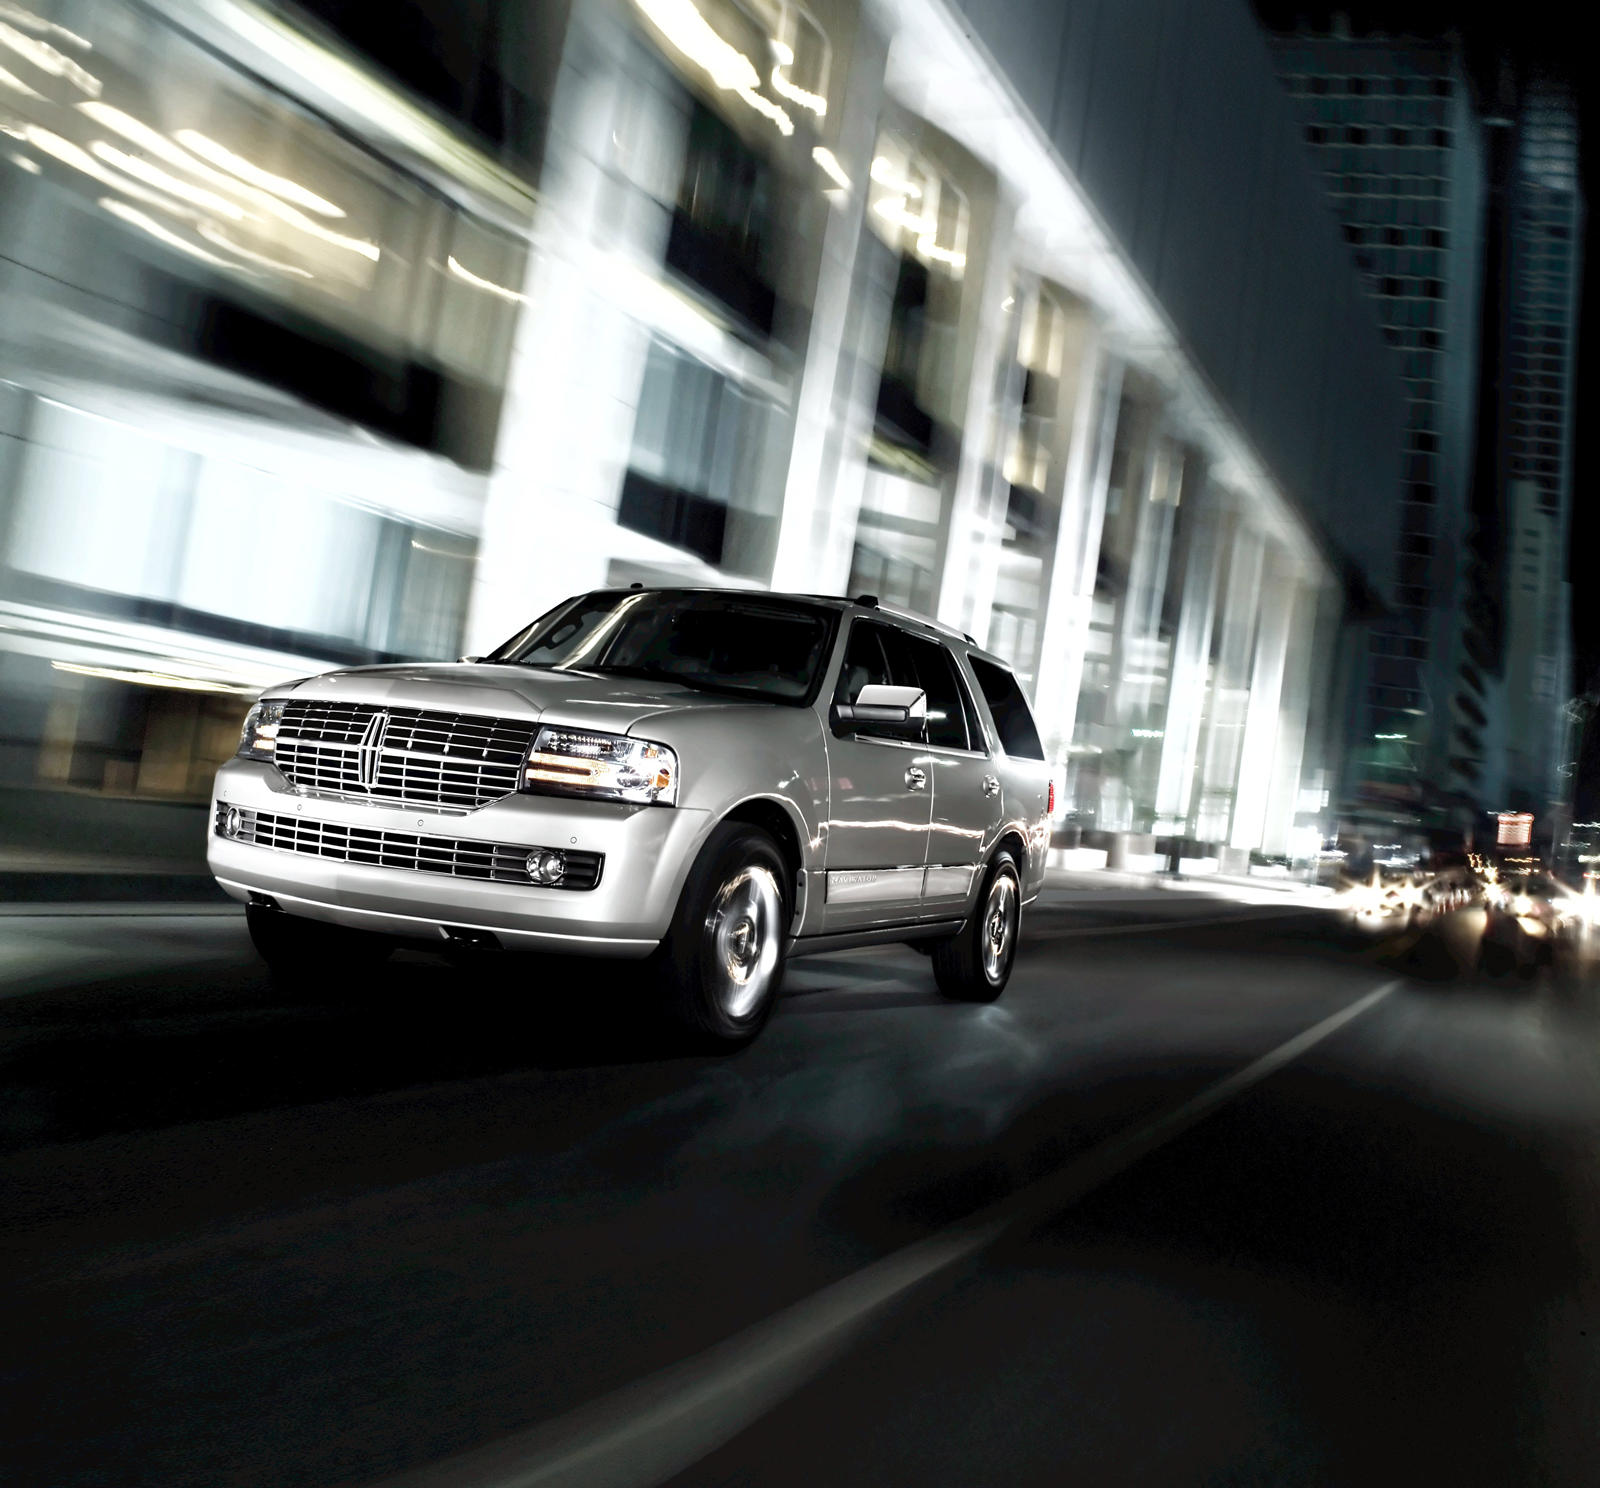 2014 Lincoln Navigator Front View Driving